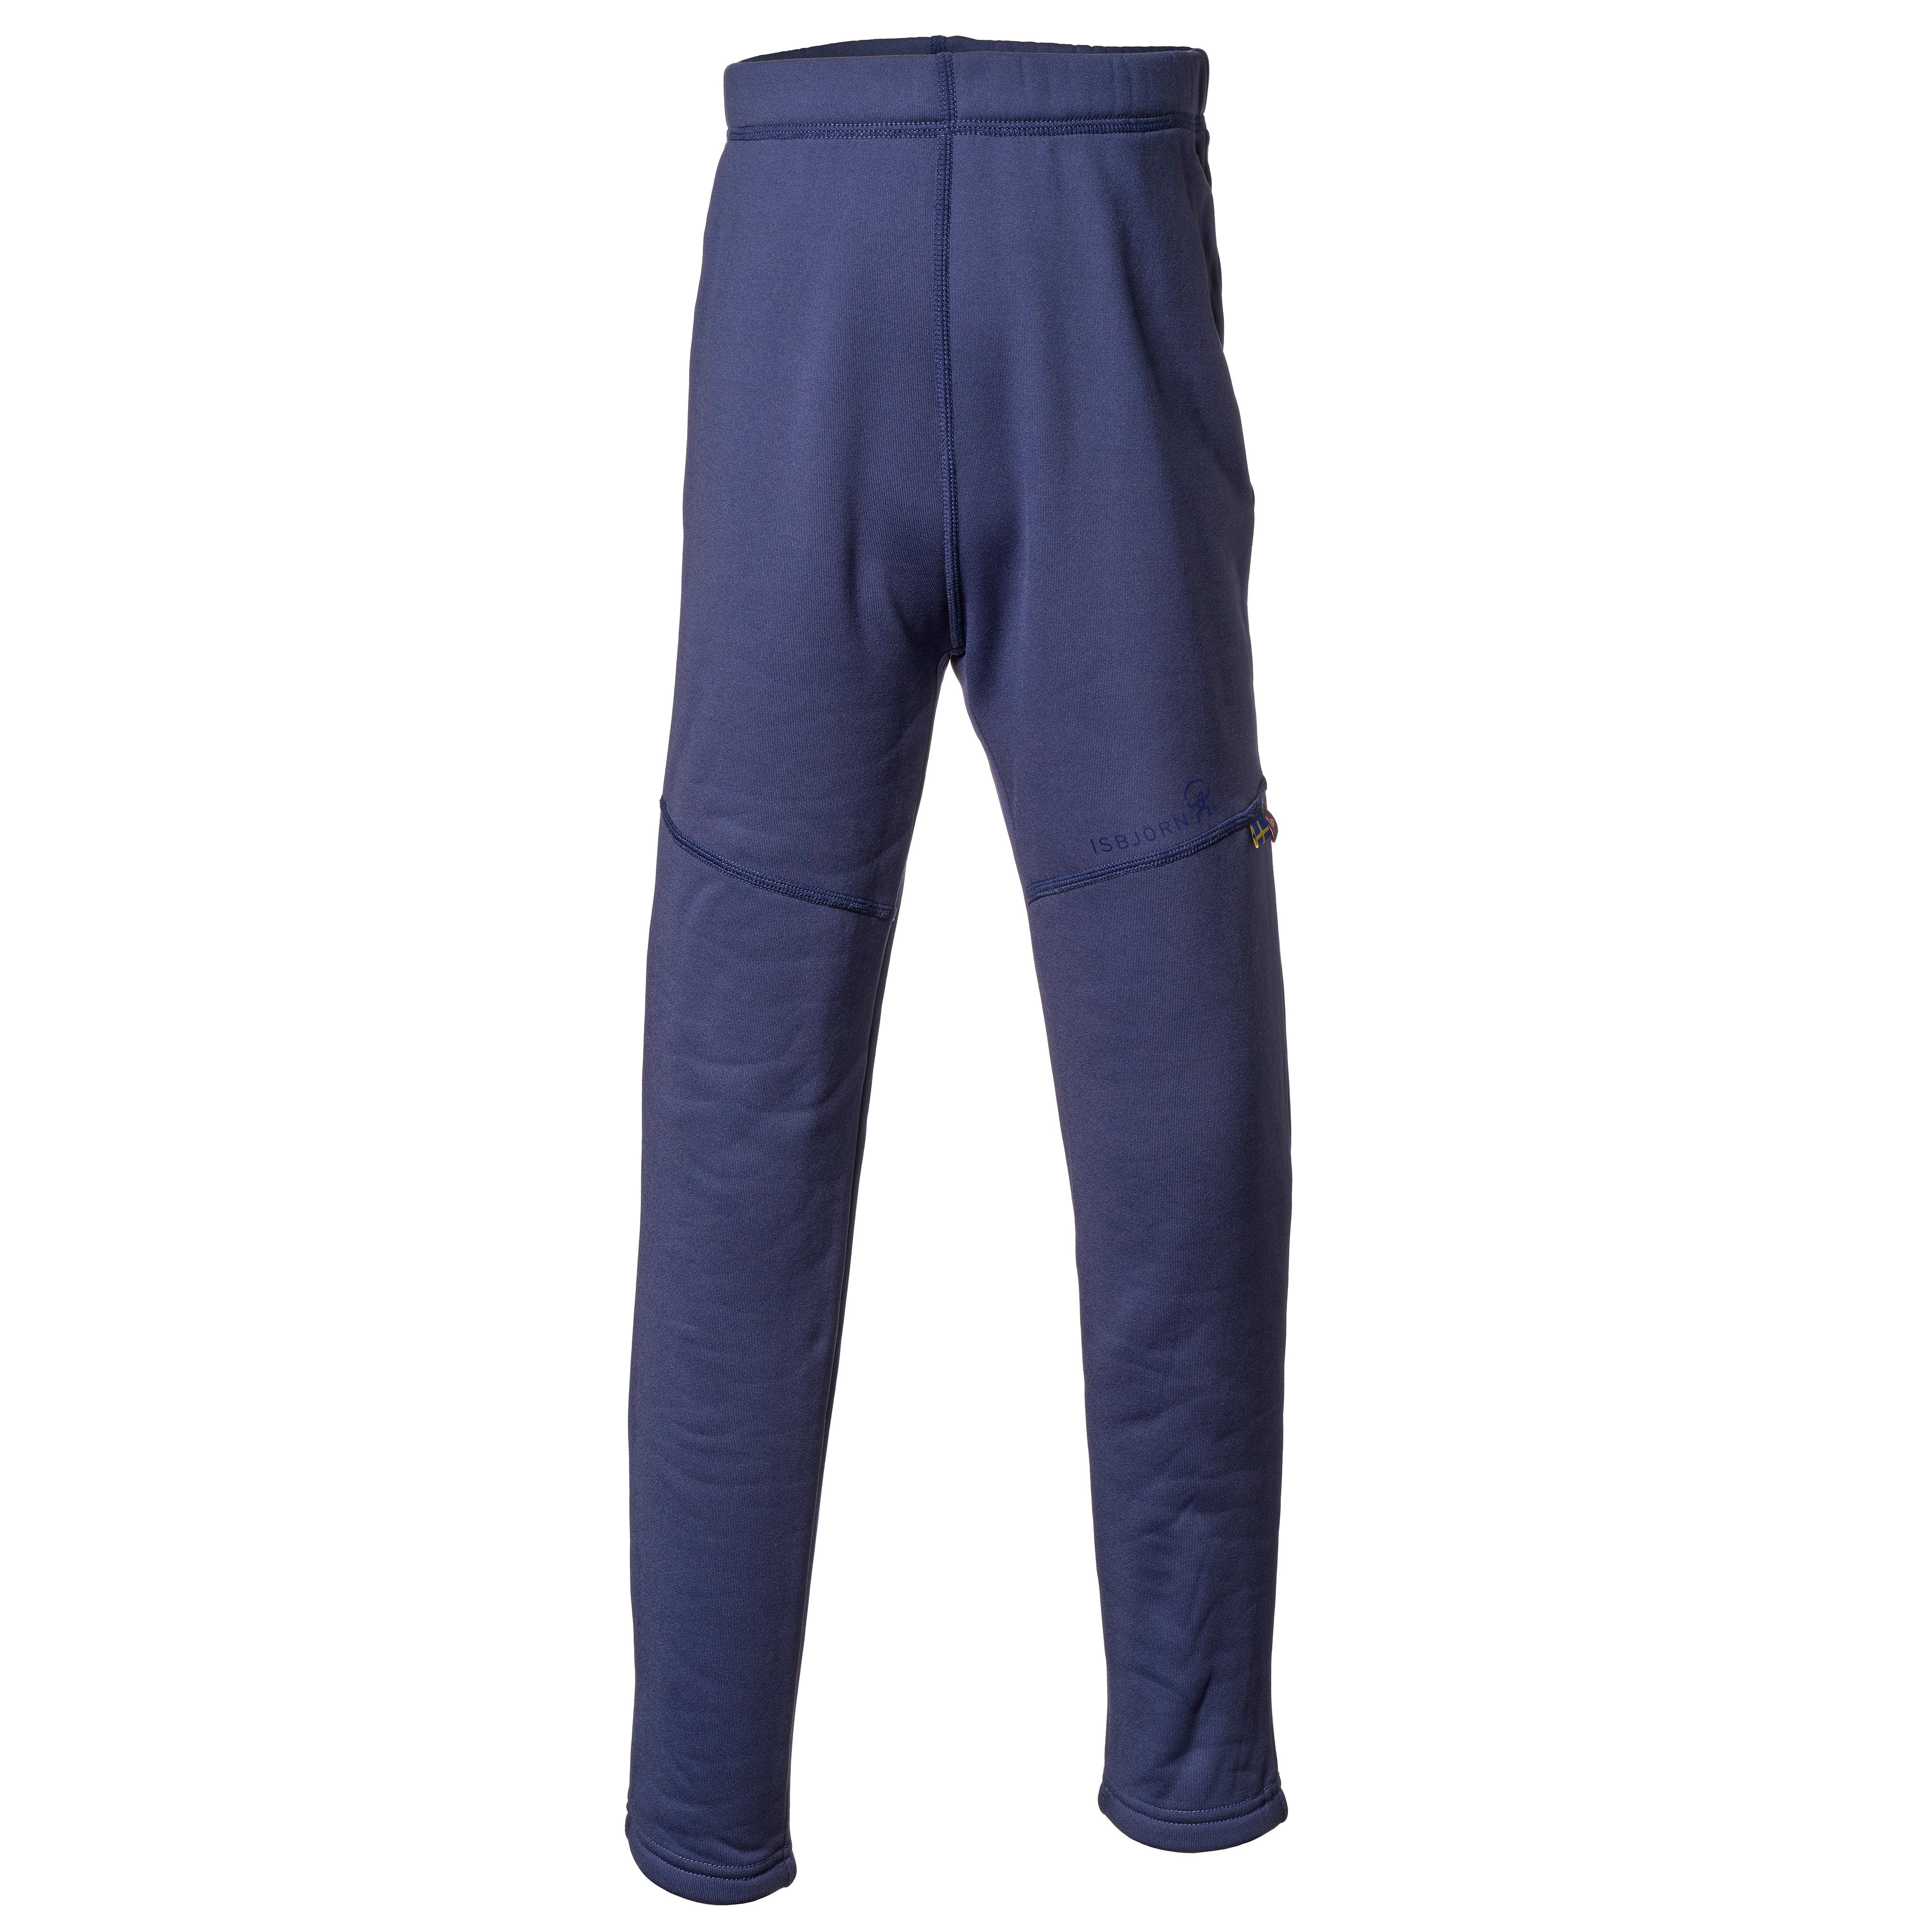 Buy Isbjörn of Sweden Panda Primaloft Pant Kids from Outnorth